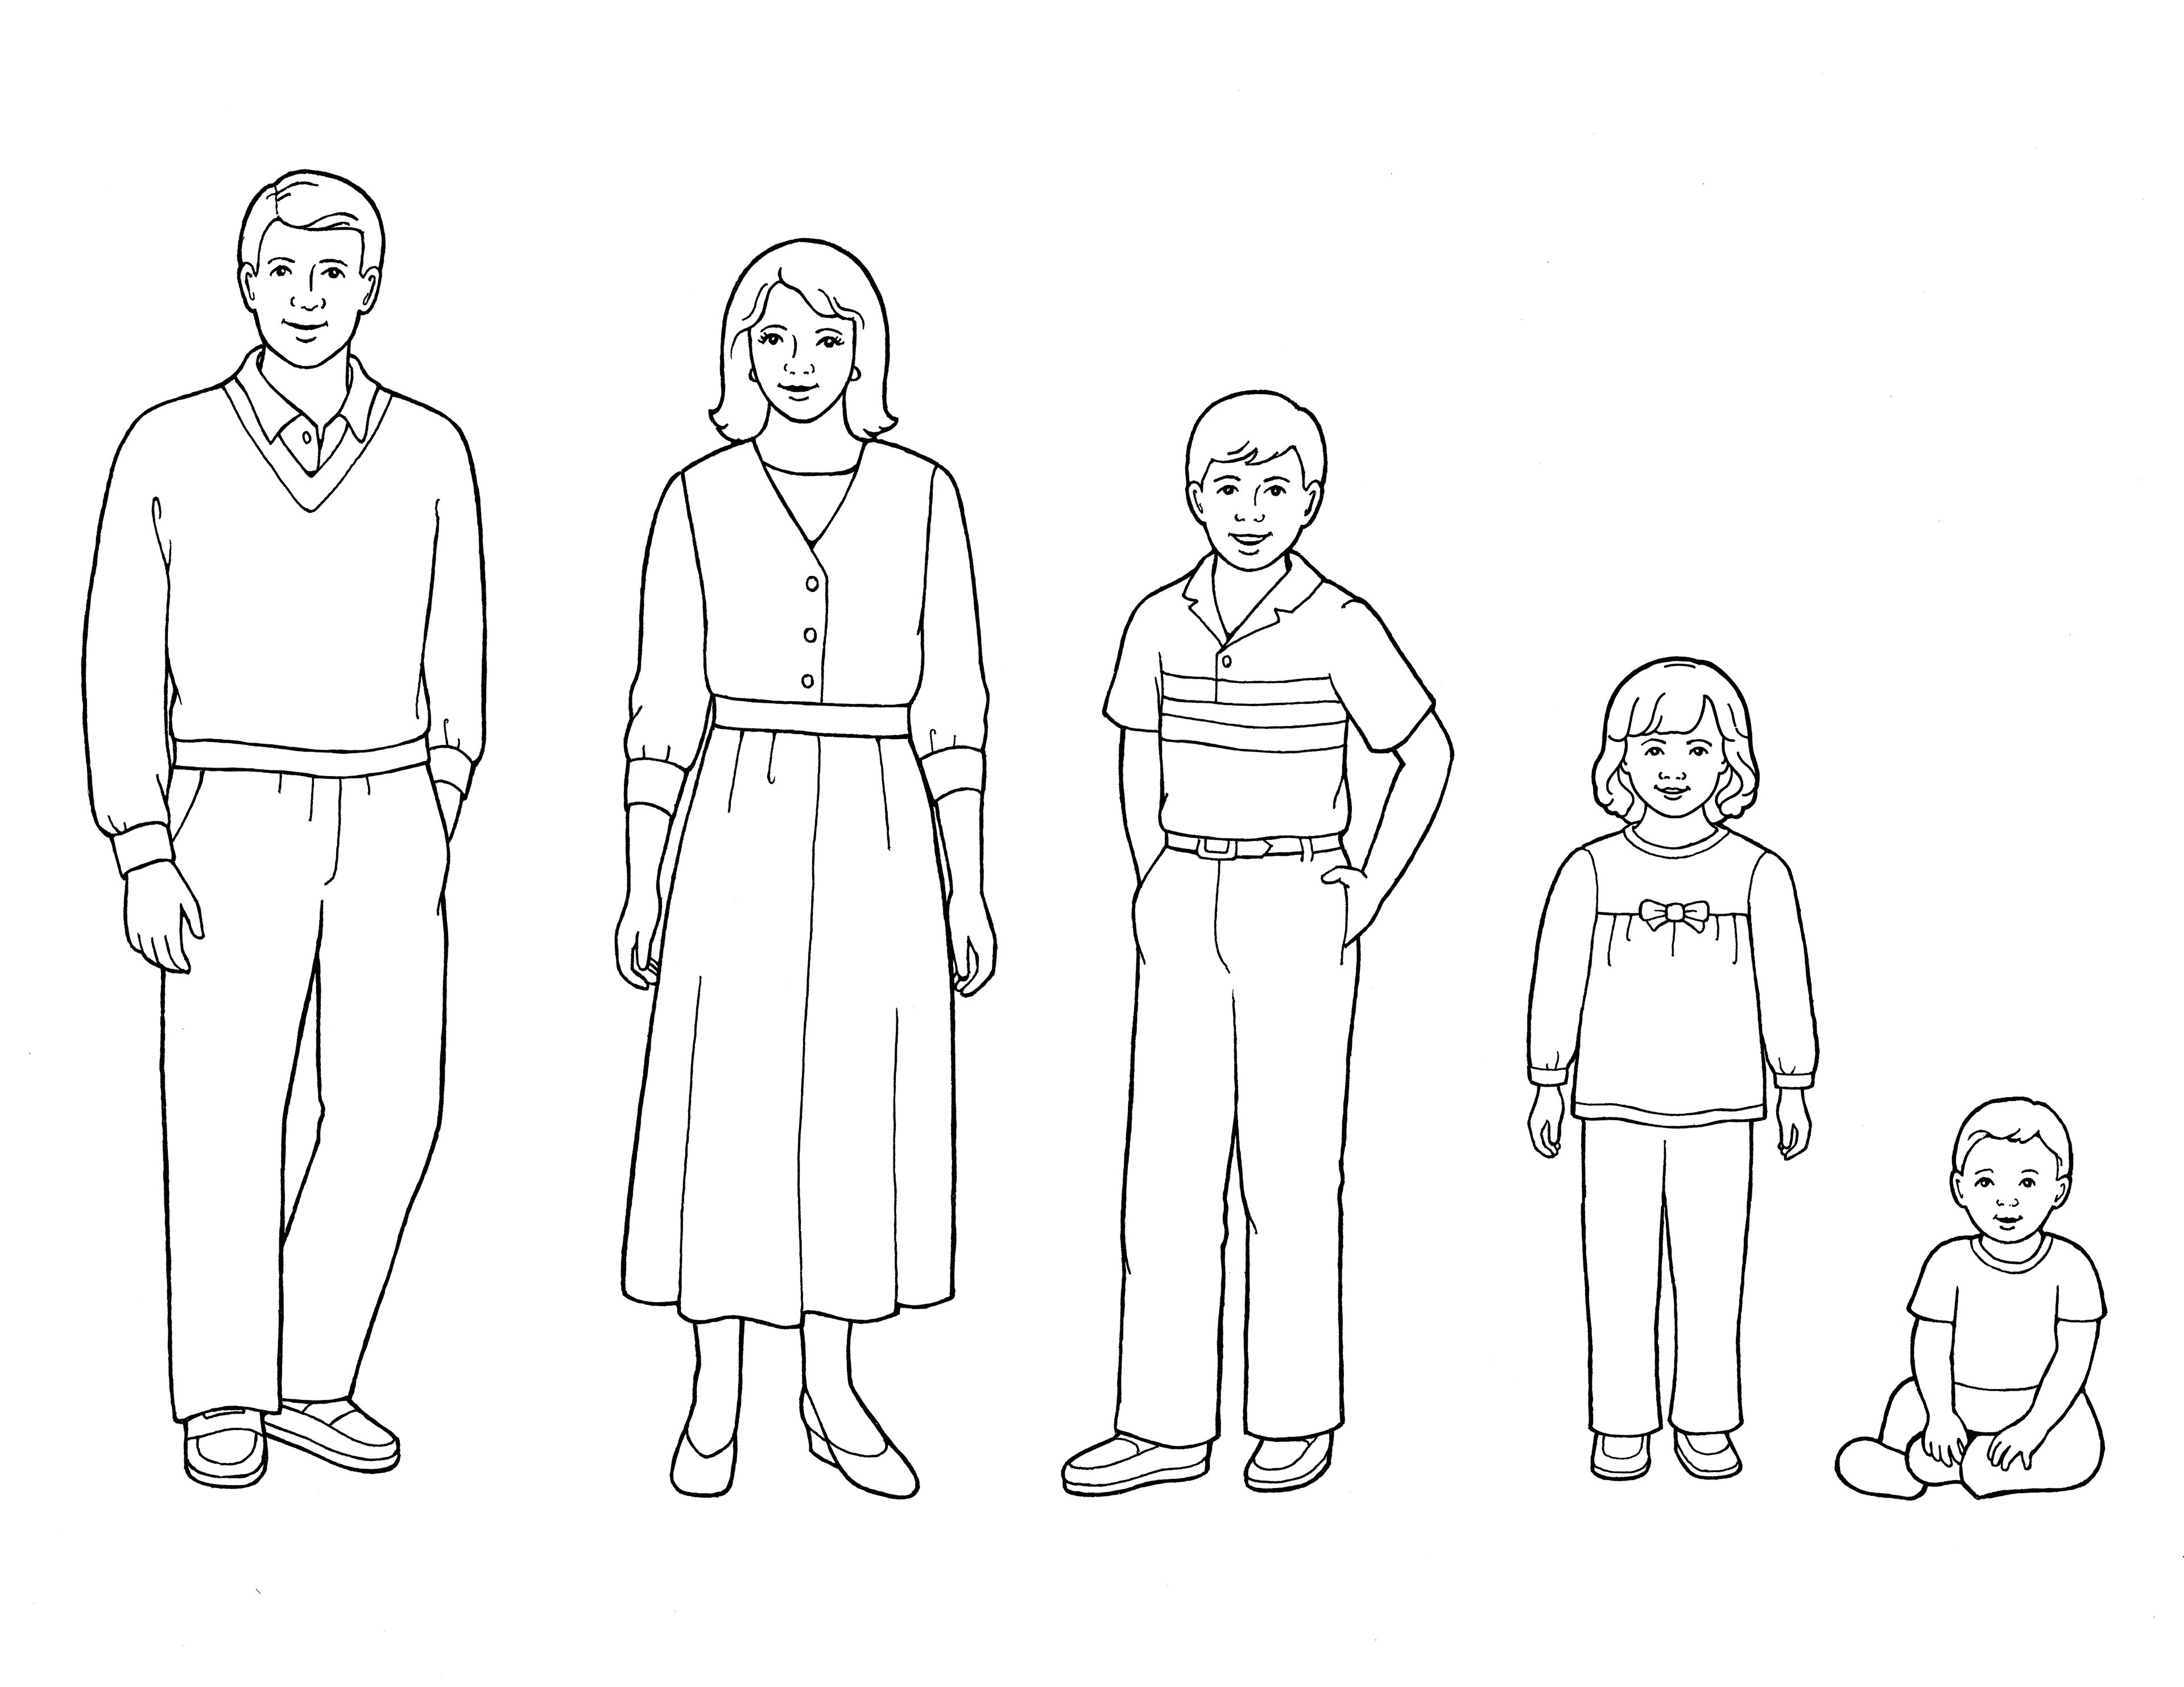 An illustration of a family of five standing with a baby boy sitting.